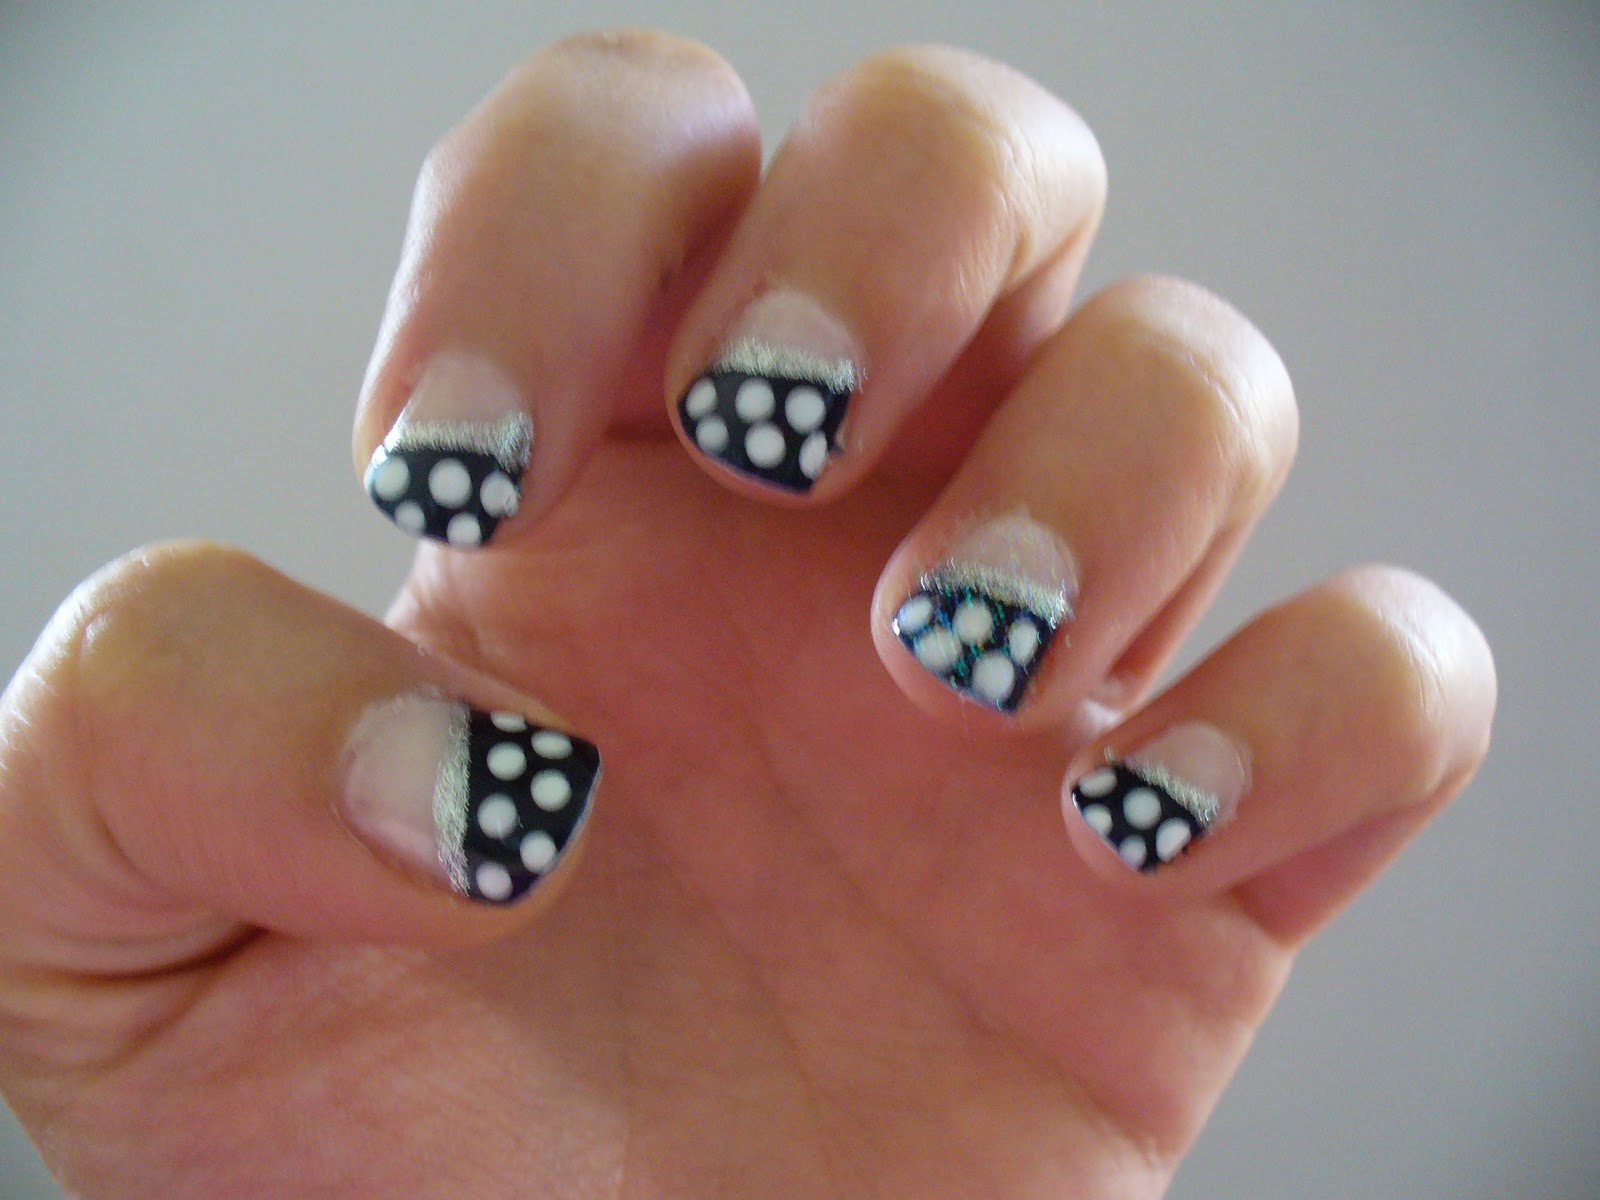 1. Easy Nail Art Designs Using Toothpicks - wide 9